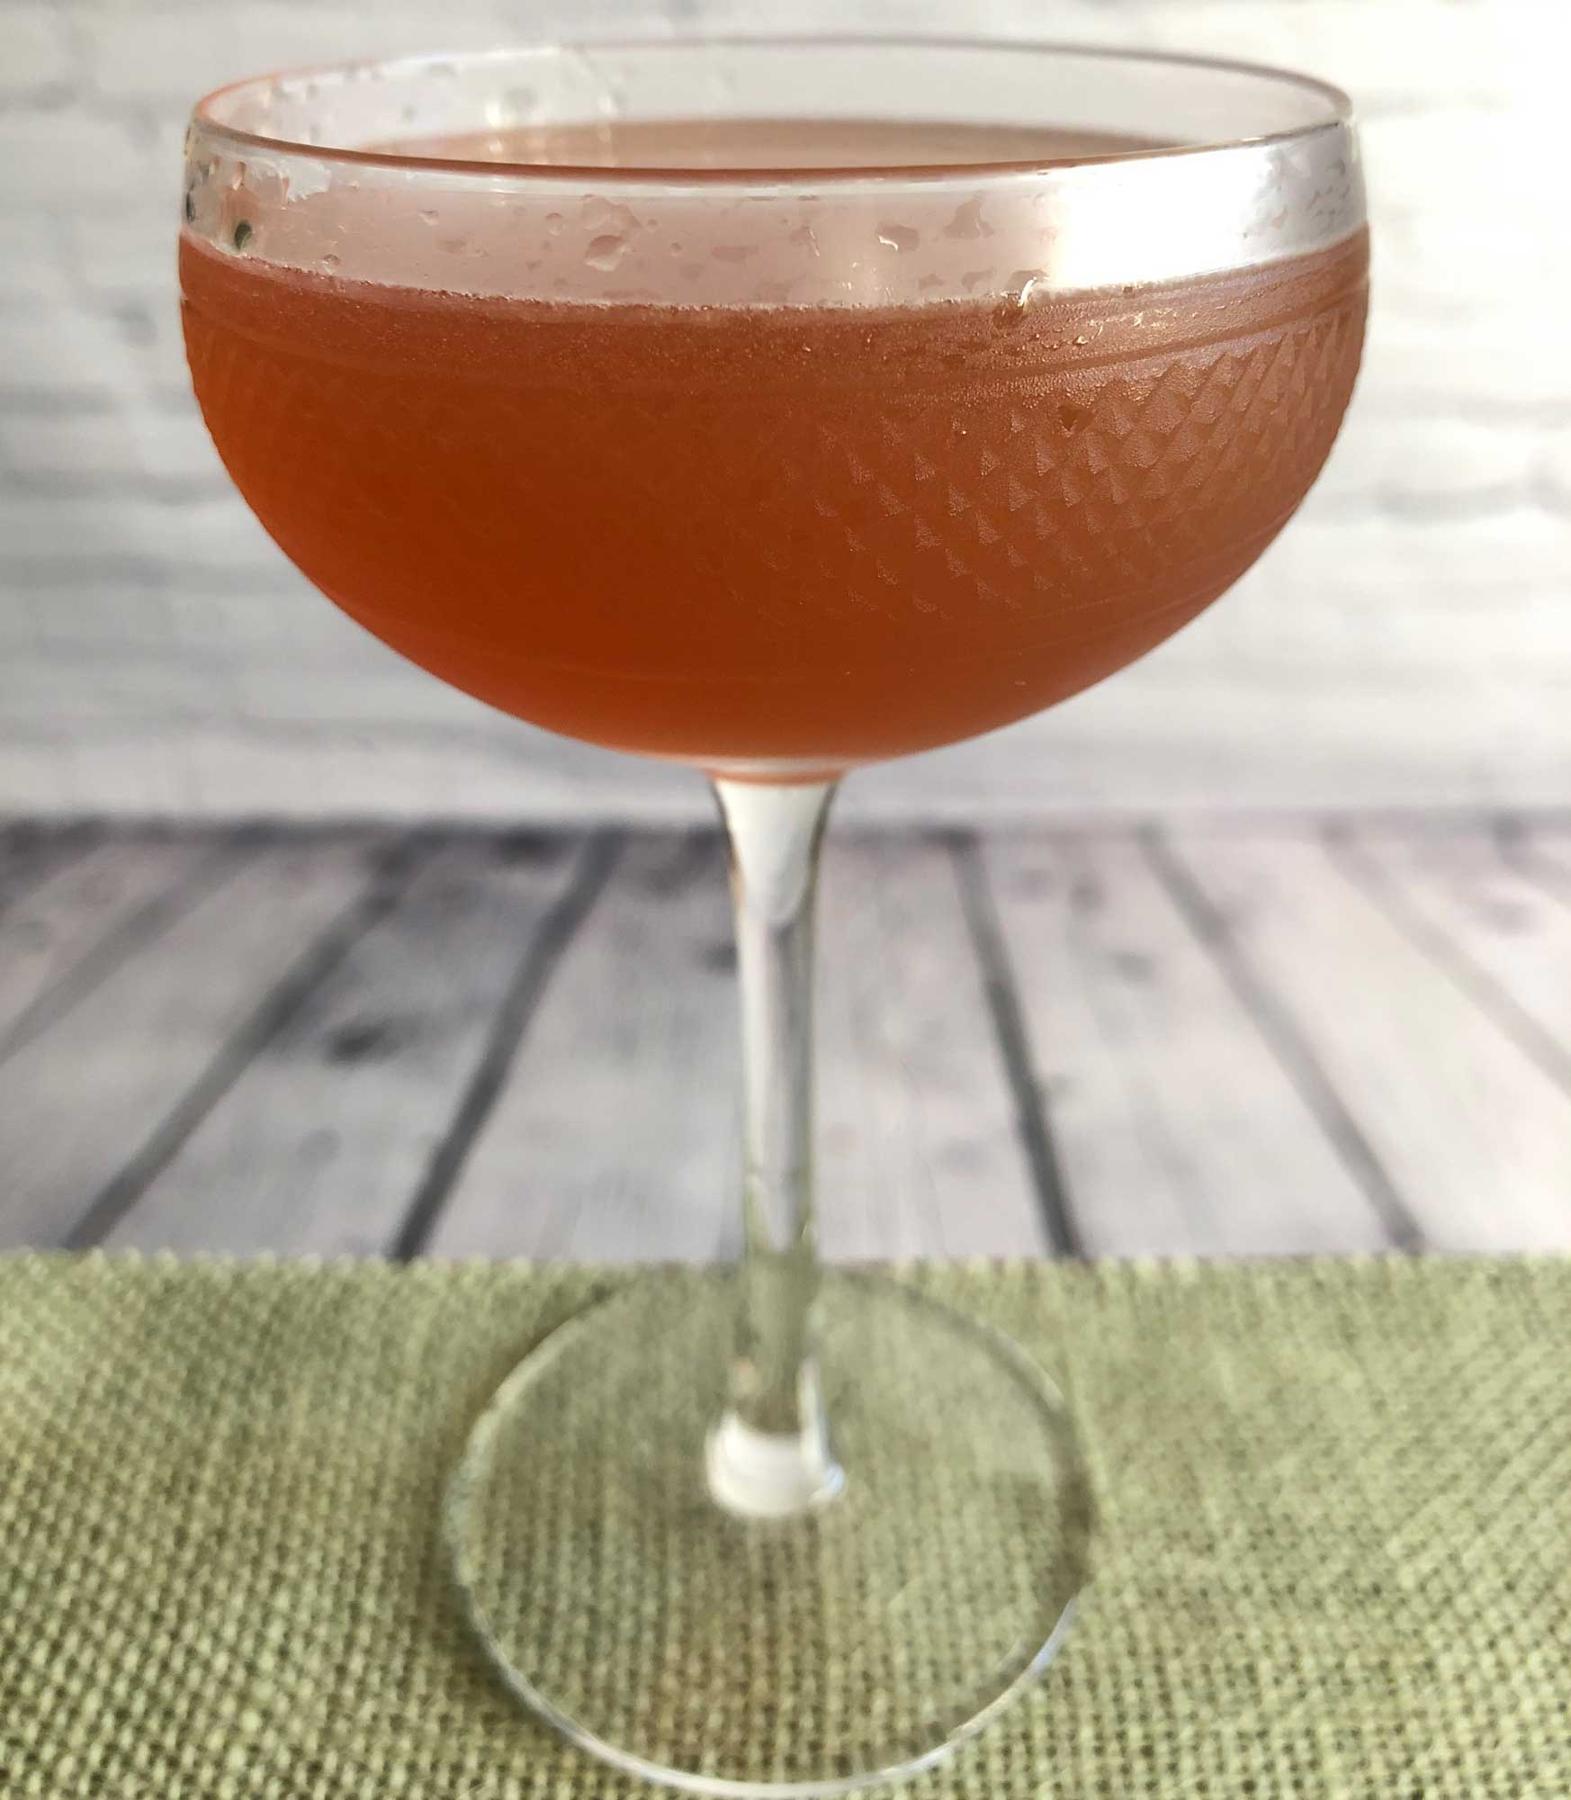 An example of the Post Modern, the mixed drink (drink), by Tom Richter, Dear Irving, New York City, featuring scotch whisky, Hayman’s Sloe Gin, lemon juice, and honey syrup; photo by Lee Edwards